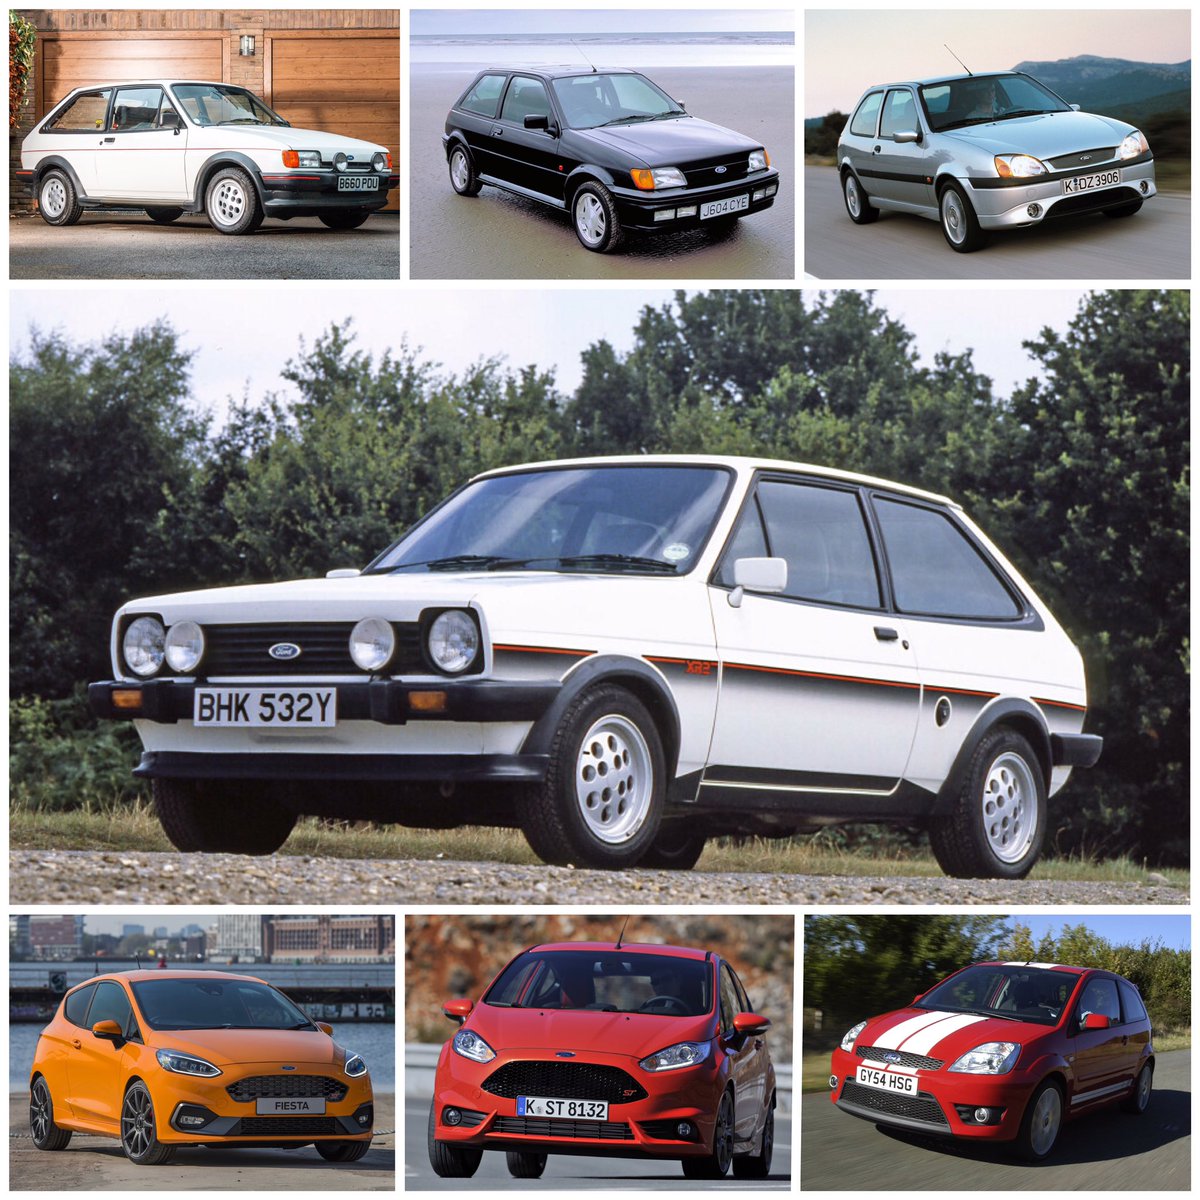 Which generation of Ford Fiesta created your favourite small fast Ford? #Ford #Fiesta #FordFiesta #ClassicCars